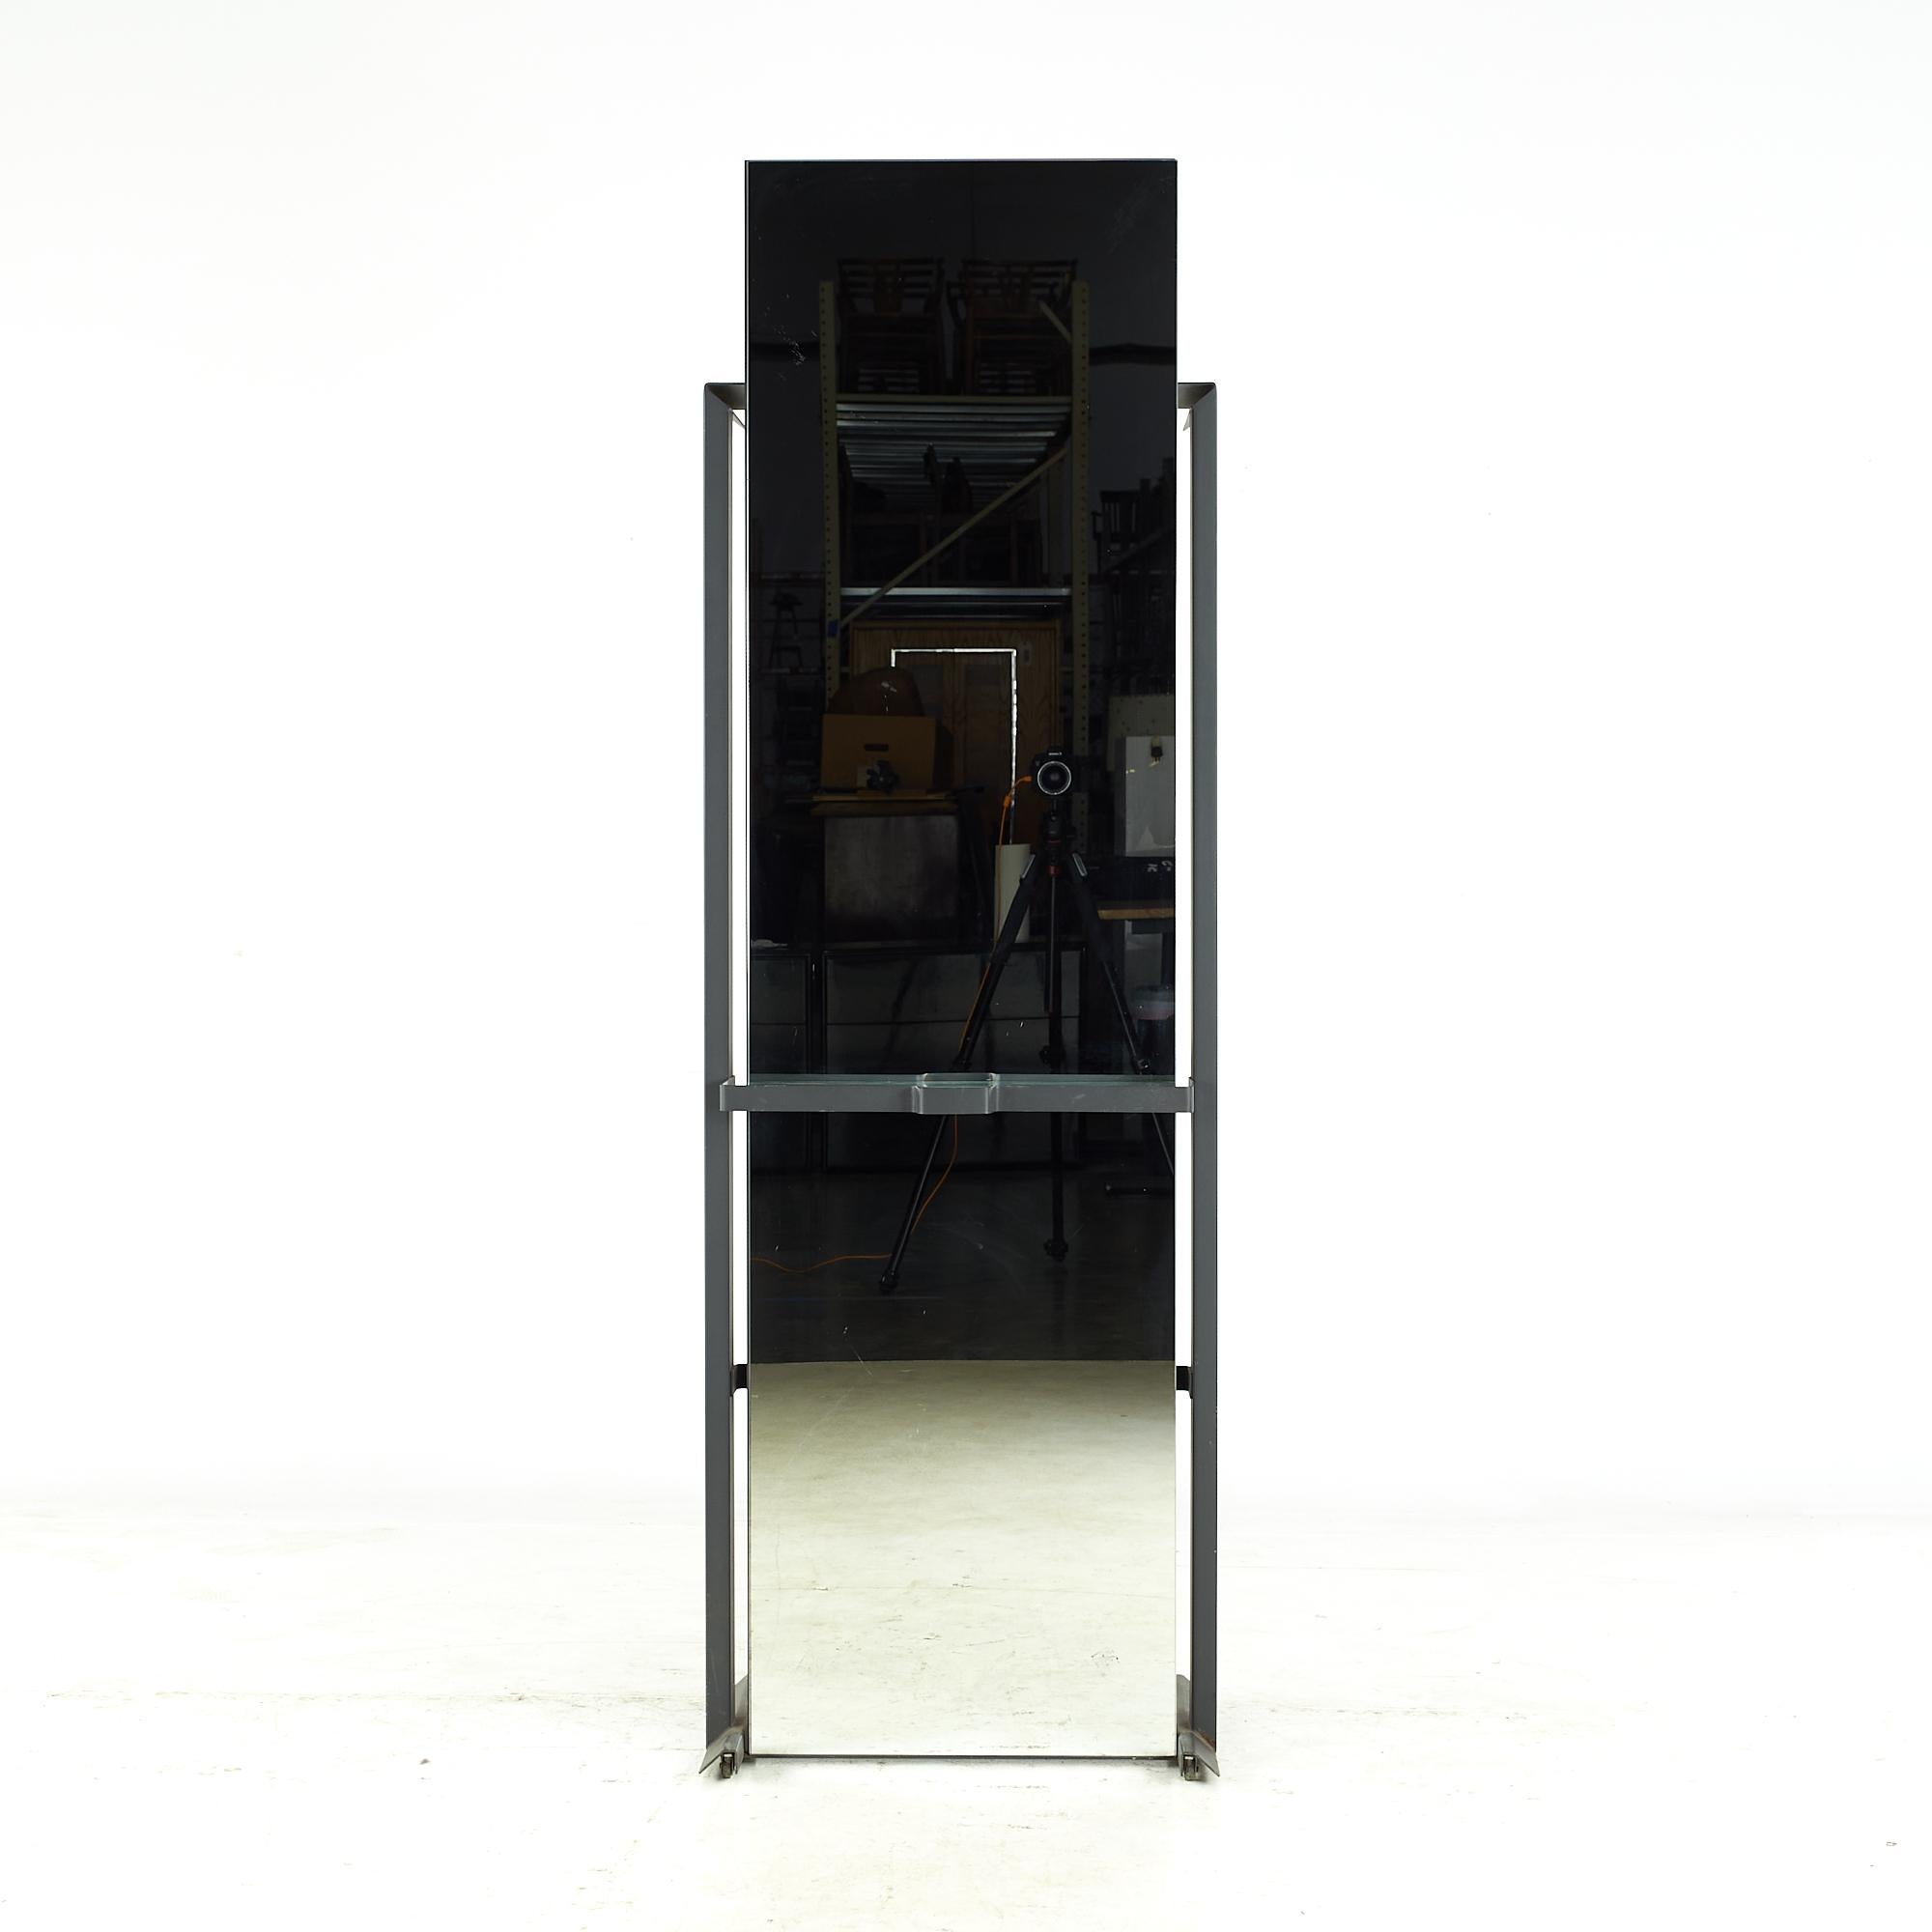 Oscar Tusquets Gaban midcentury mirrored valet.

This valet measures: 23.5 wide x 17.25 deep x 74 inches high.

All pieces of furniture can be had in what we call restored vintage condition. That means the piece is restored upon purchase so it’s